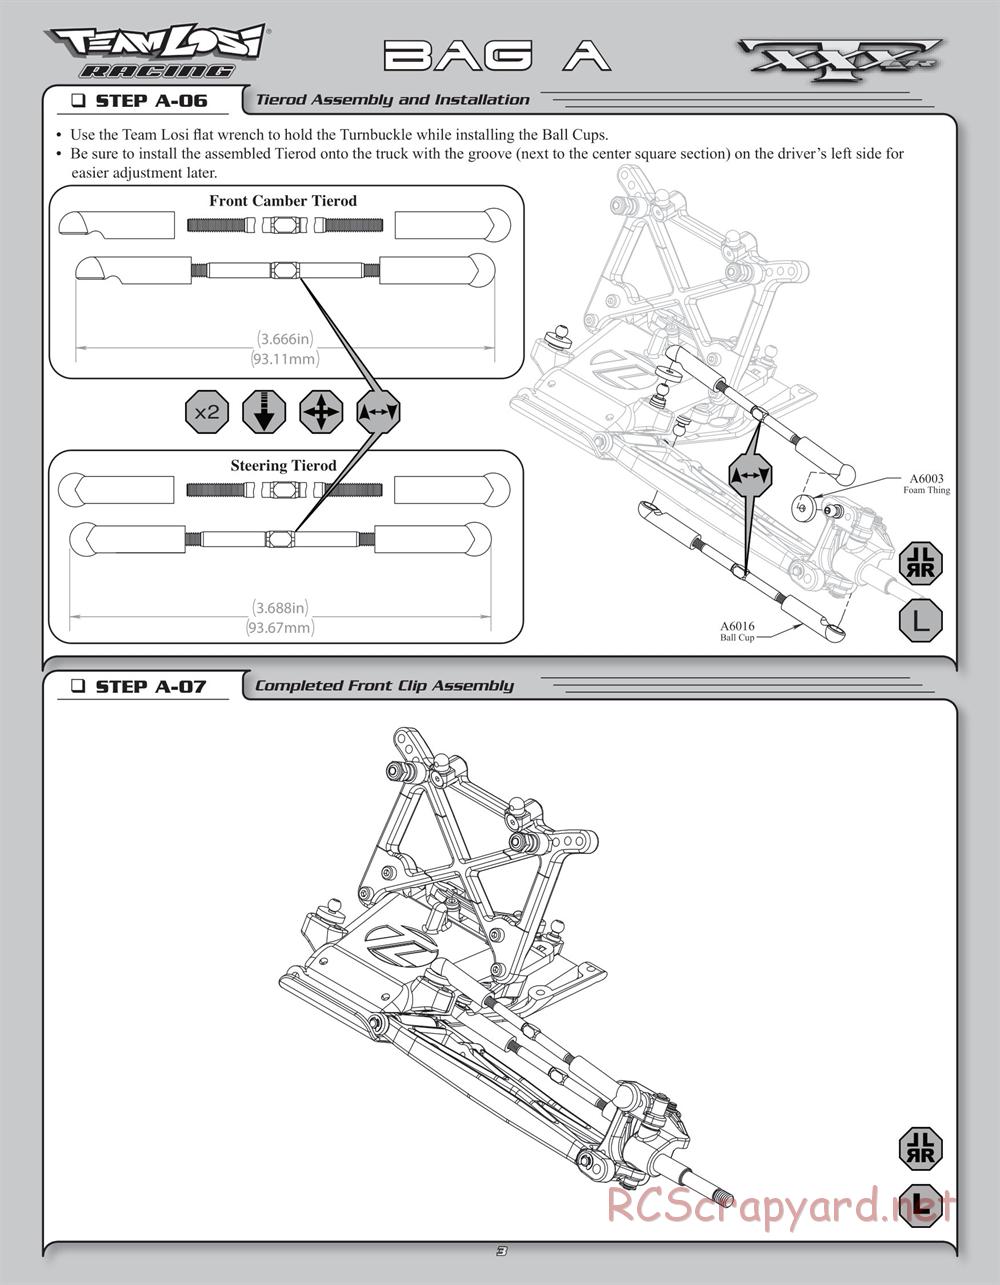 Team Losi - XXXT CR - Manual - Page 6